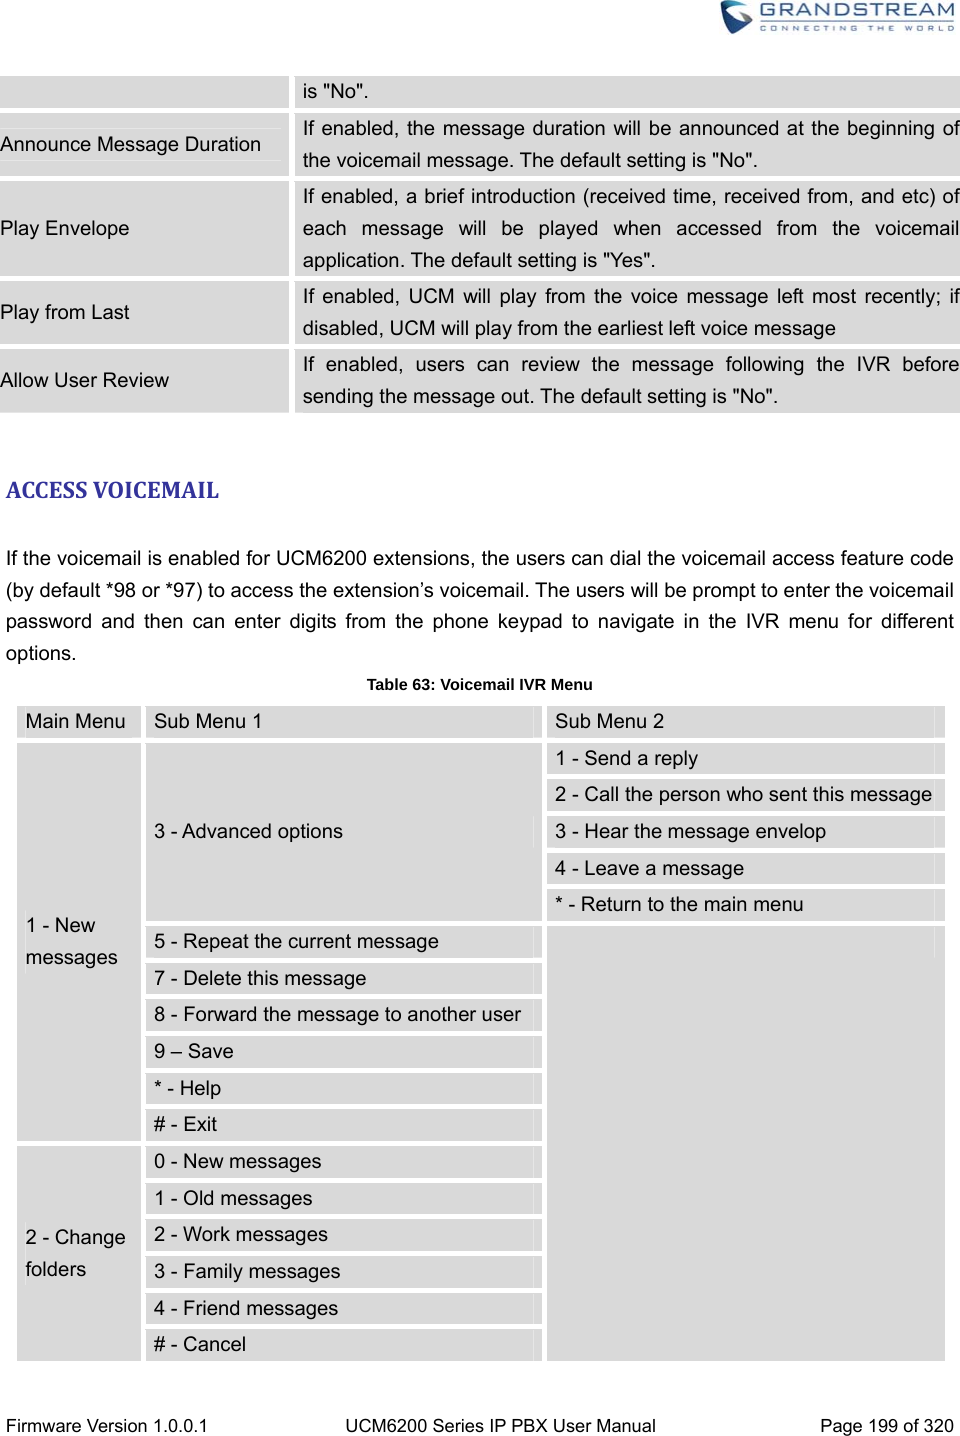  Firmware Version 1.0.0.1  UCM6200 Series IP PBX User Manual  Page 199 of 320 is &quot;No&quot;. Announce Message Duration  If enabled, the message duration will be announced at the beginning of the voicemail message. The default setting is &quot;No&quot;. Play Envelope If enabled, a brief introduction (received time, received from, and etc) of each message will be played when accessed from the voicemail application. The default setting is &quot;Yes&quot;. Play from Last  If enabled, UCM will play from the voice message left most recently; if disabled, UCM will play from the earliest left voice message Allow User Review  If enabled, users can review the message following the IVR before sending the message out. The default setting is &quot;No&quot;.  ACCESSVOICEMAIL If the voicemail is enabled for UCM6200 extensions, the users can dial the voicemail access feature code (by default *98 or *97) to access the extension’s voicemail. The users will be prompt to enter the voicemail password and then can enter digits from the phone keypad to navigate in the IVR menu for different options. Table 63: Voicemail IVR Menu Main Menu  Sub Menu 1  Sub Menu 2 1 - New messages 3 - Advanced options 1 - Send a reply 2 - Call the person who sent this message3 - Hear the message envelop 4 - Leave a message * - Return to the main menu 5 - Repeat the current message   7 - Delete this message 8 - Forward the message to another user 9 – Save * - Help # - Exit 2 - Change folders 0 - New messages 1 - Old messages 2 - Work messages 3 - Family messages 4 - Friend messages # - Cancel 